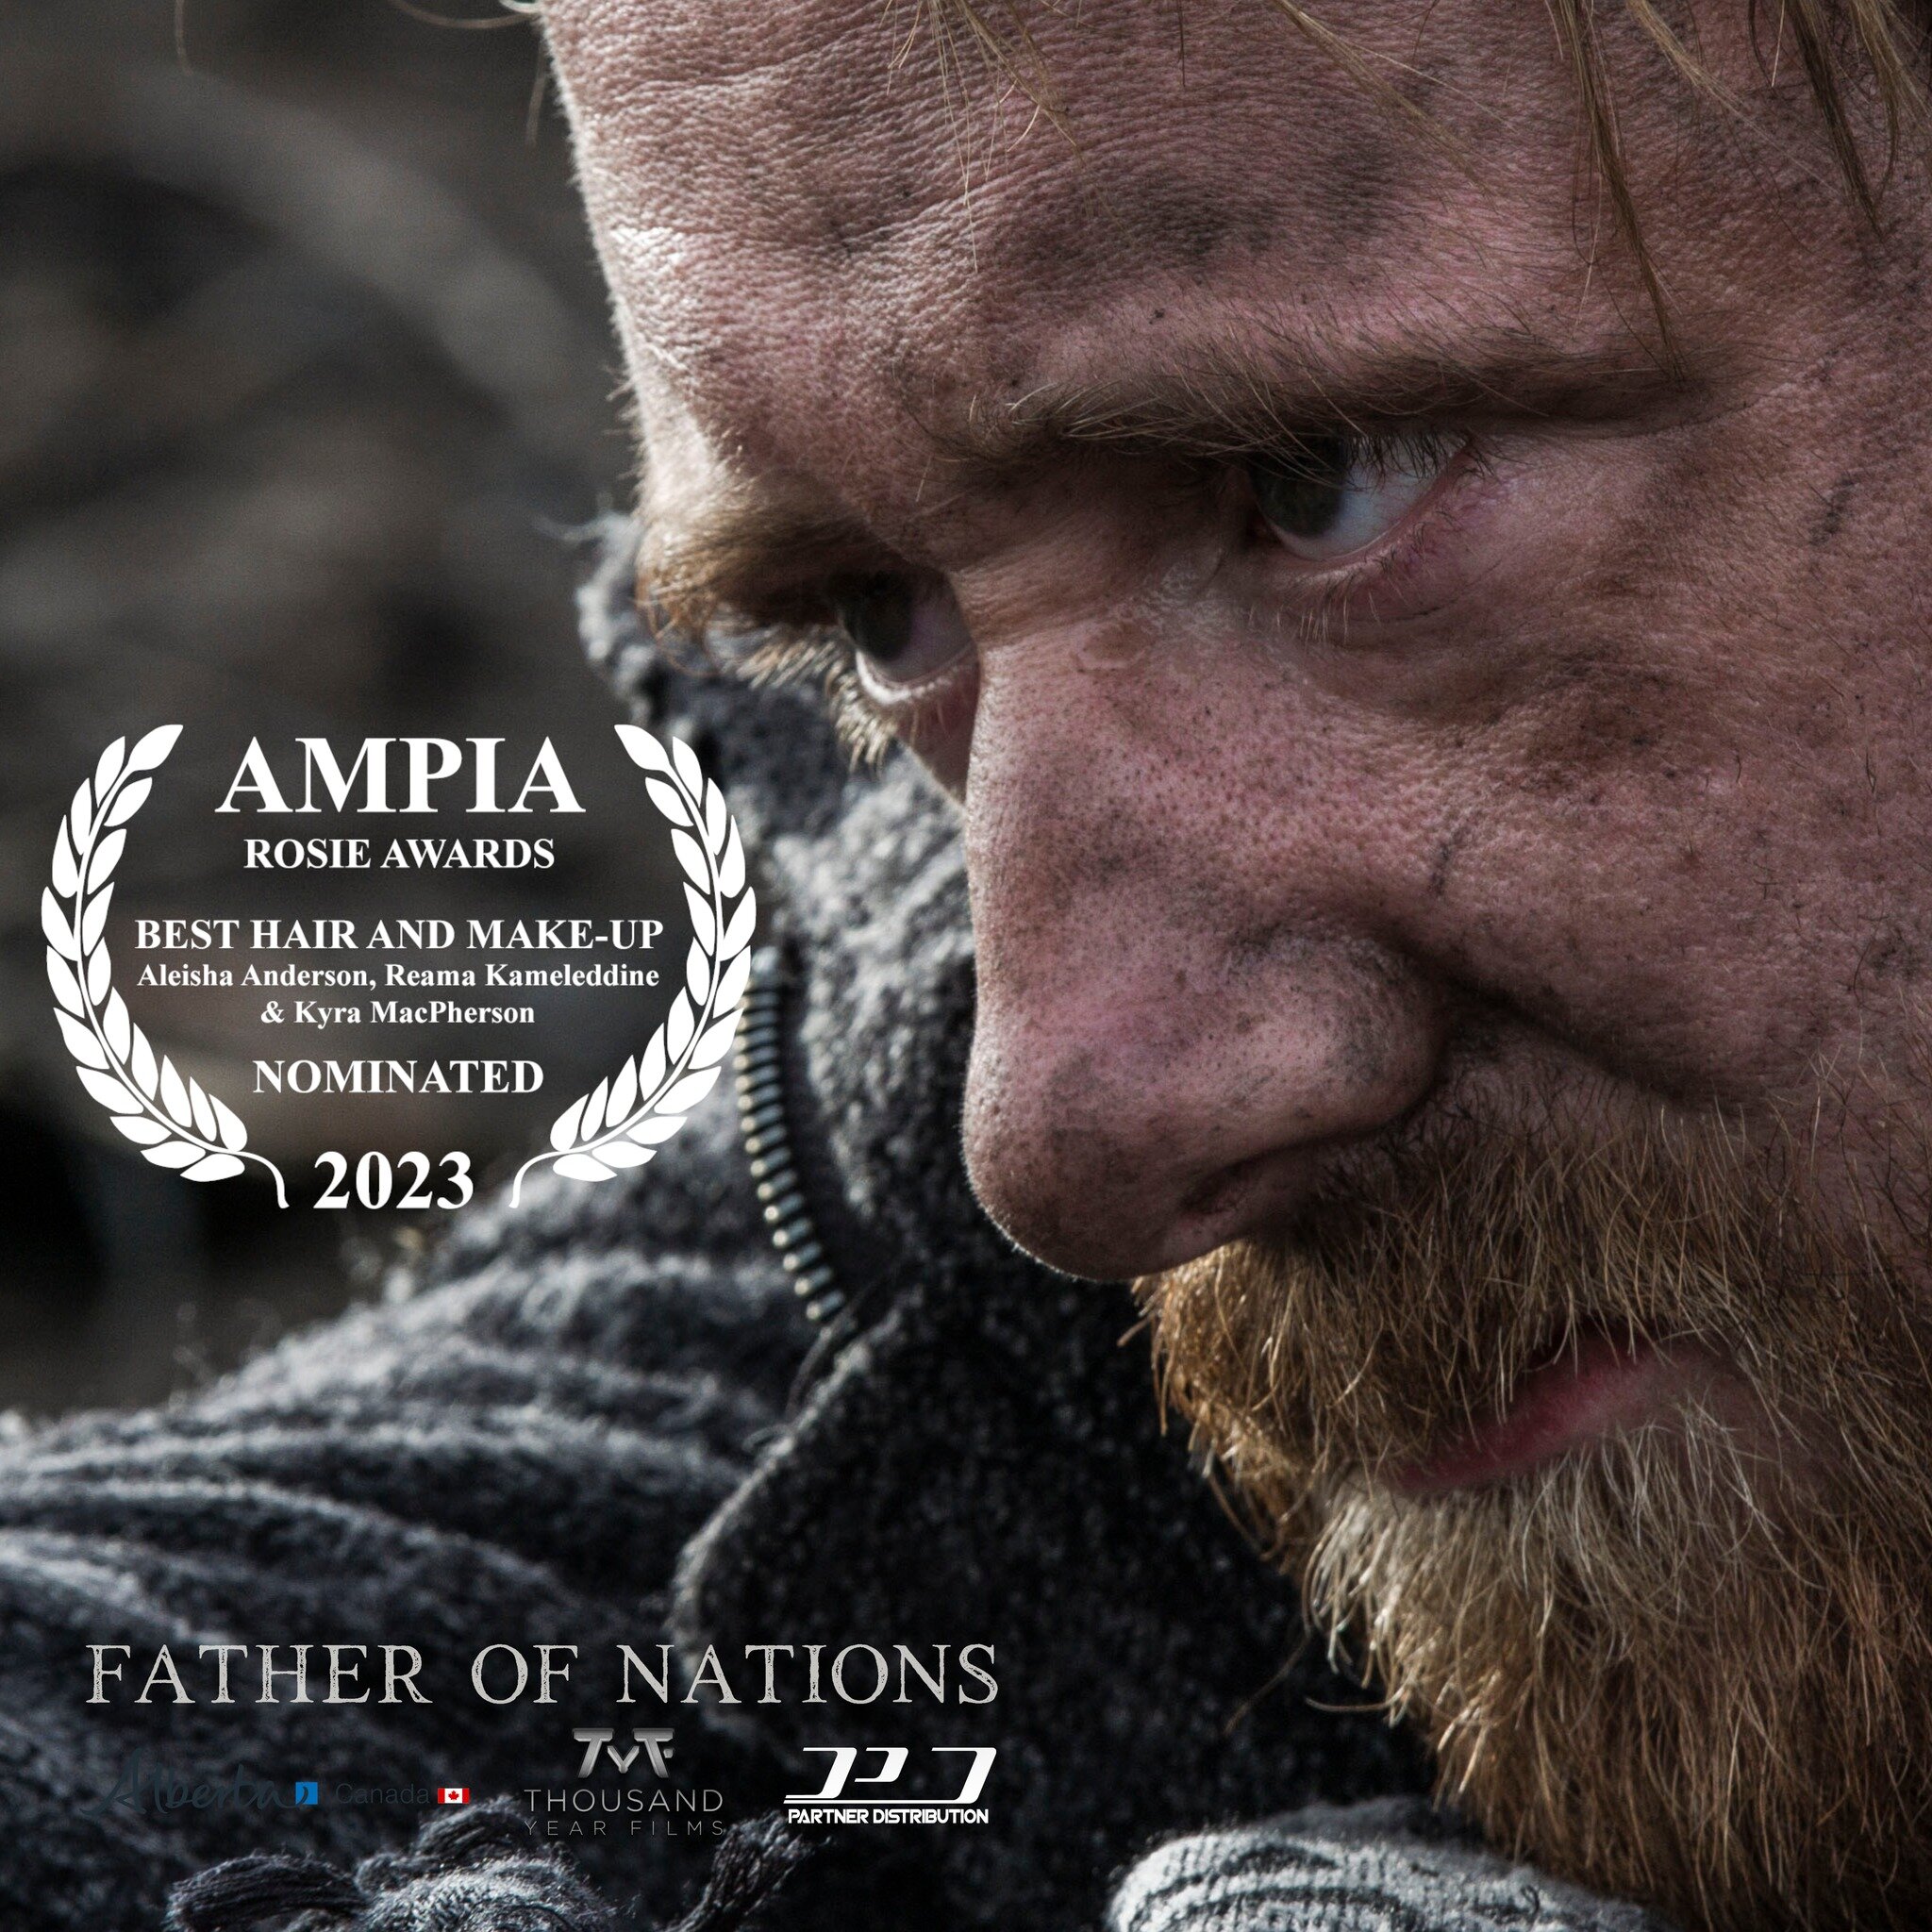 @fatherofnationsfilm, Best Hair and Makeup @yourampia nomination is shared by @aleisha_anderson , @palespiritarts Kyra MacPherson and @birdsbirds821 Reama Kamaleddine . This post-apocalyptic film required a level of dirt and grime to be always presen